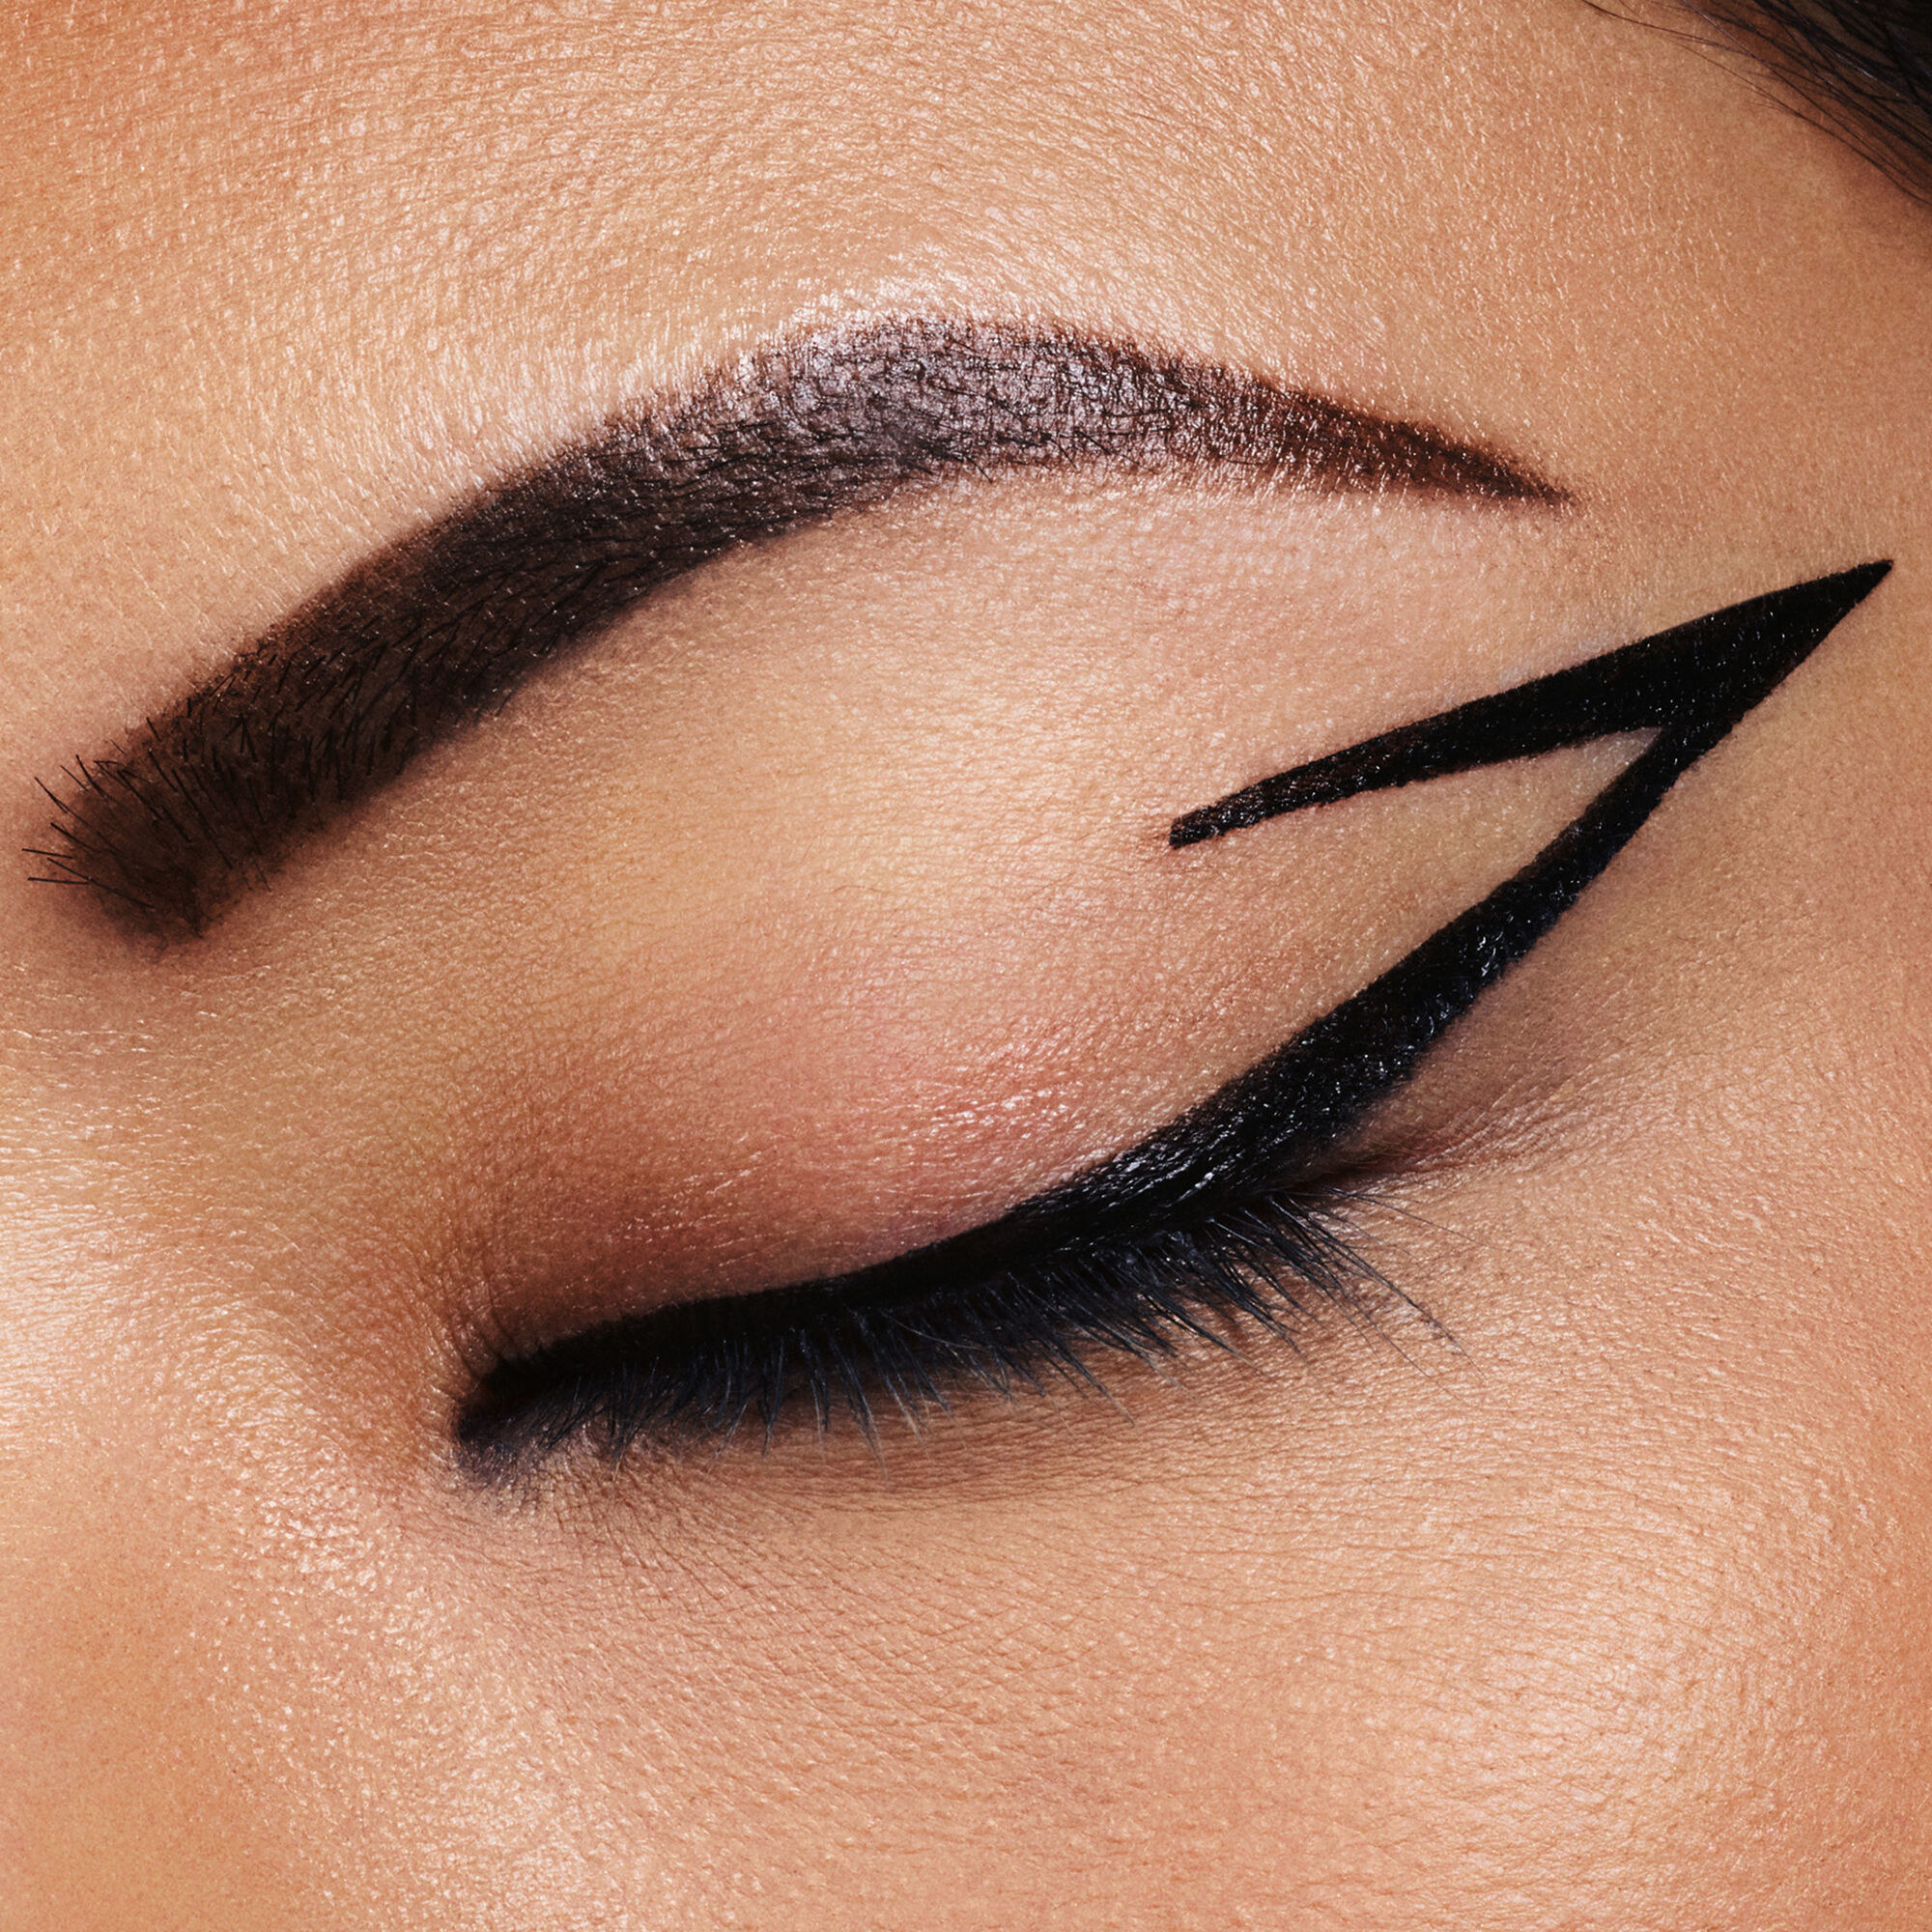 A person with bold eyeliner